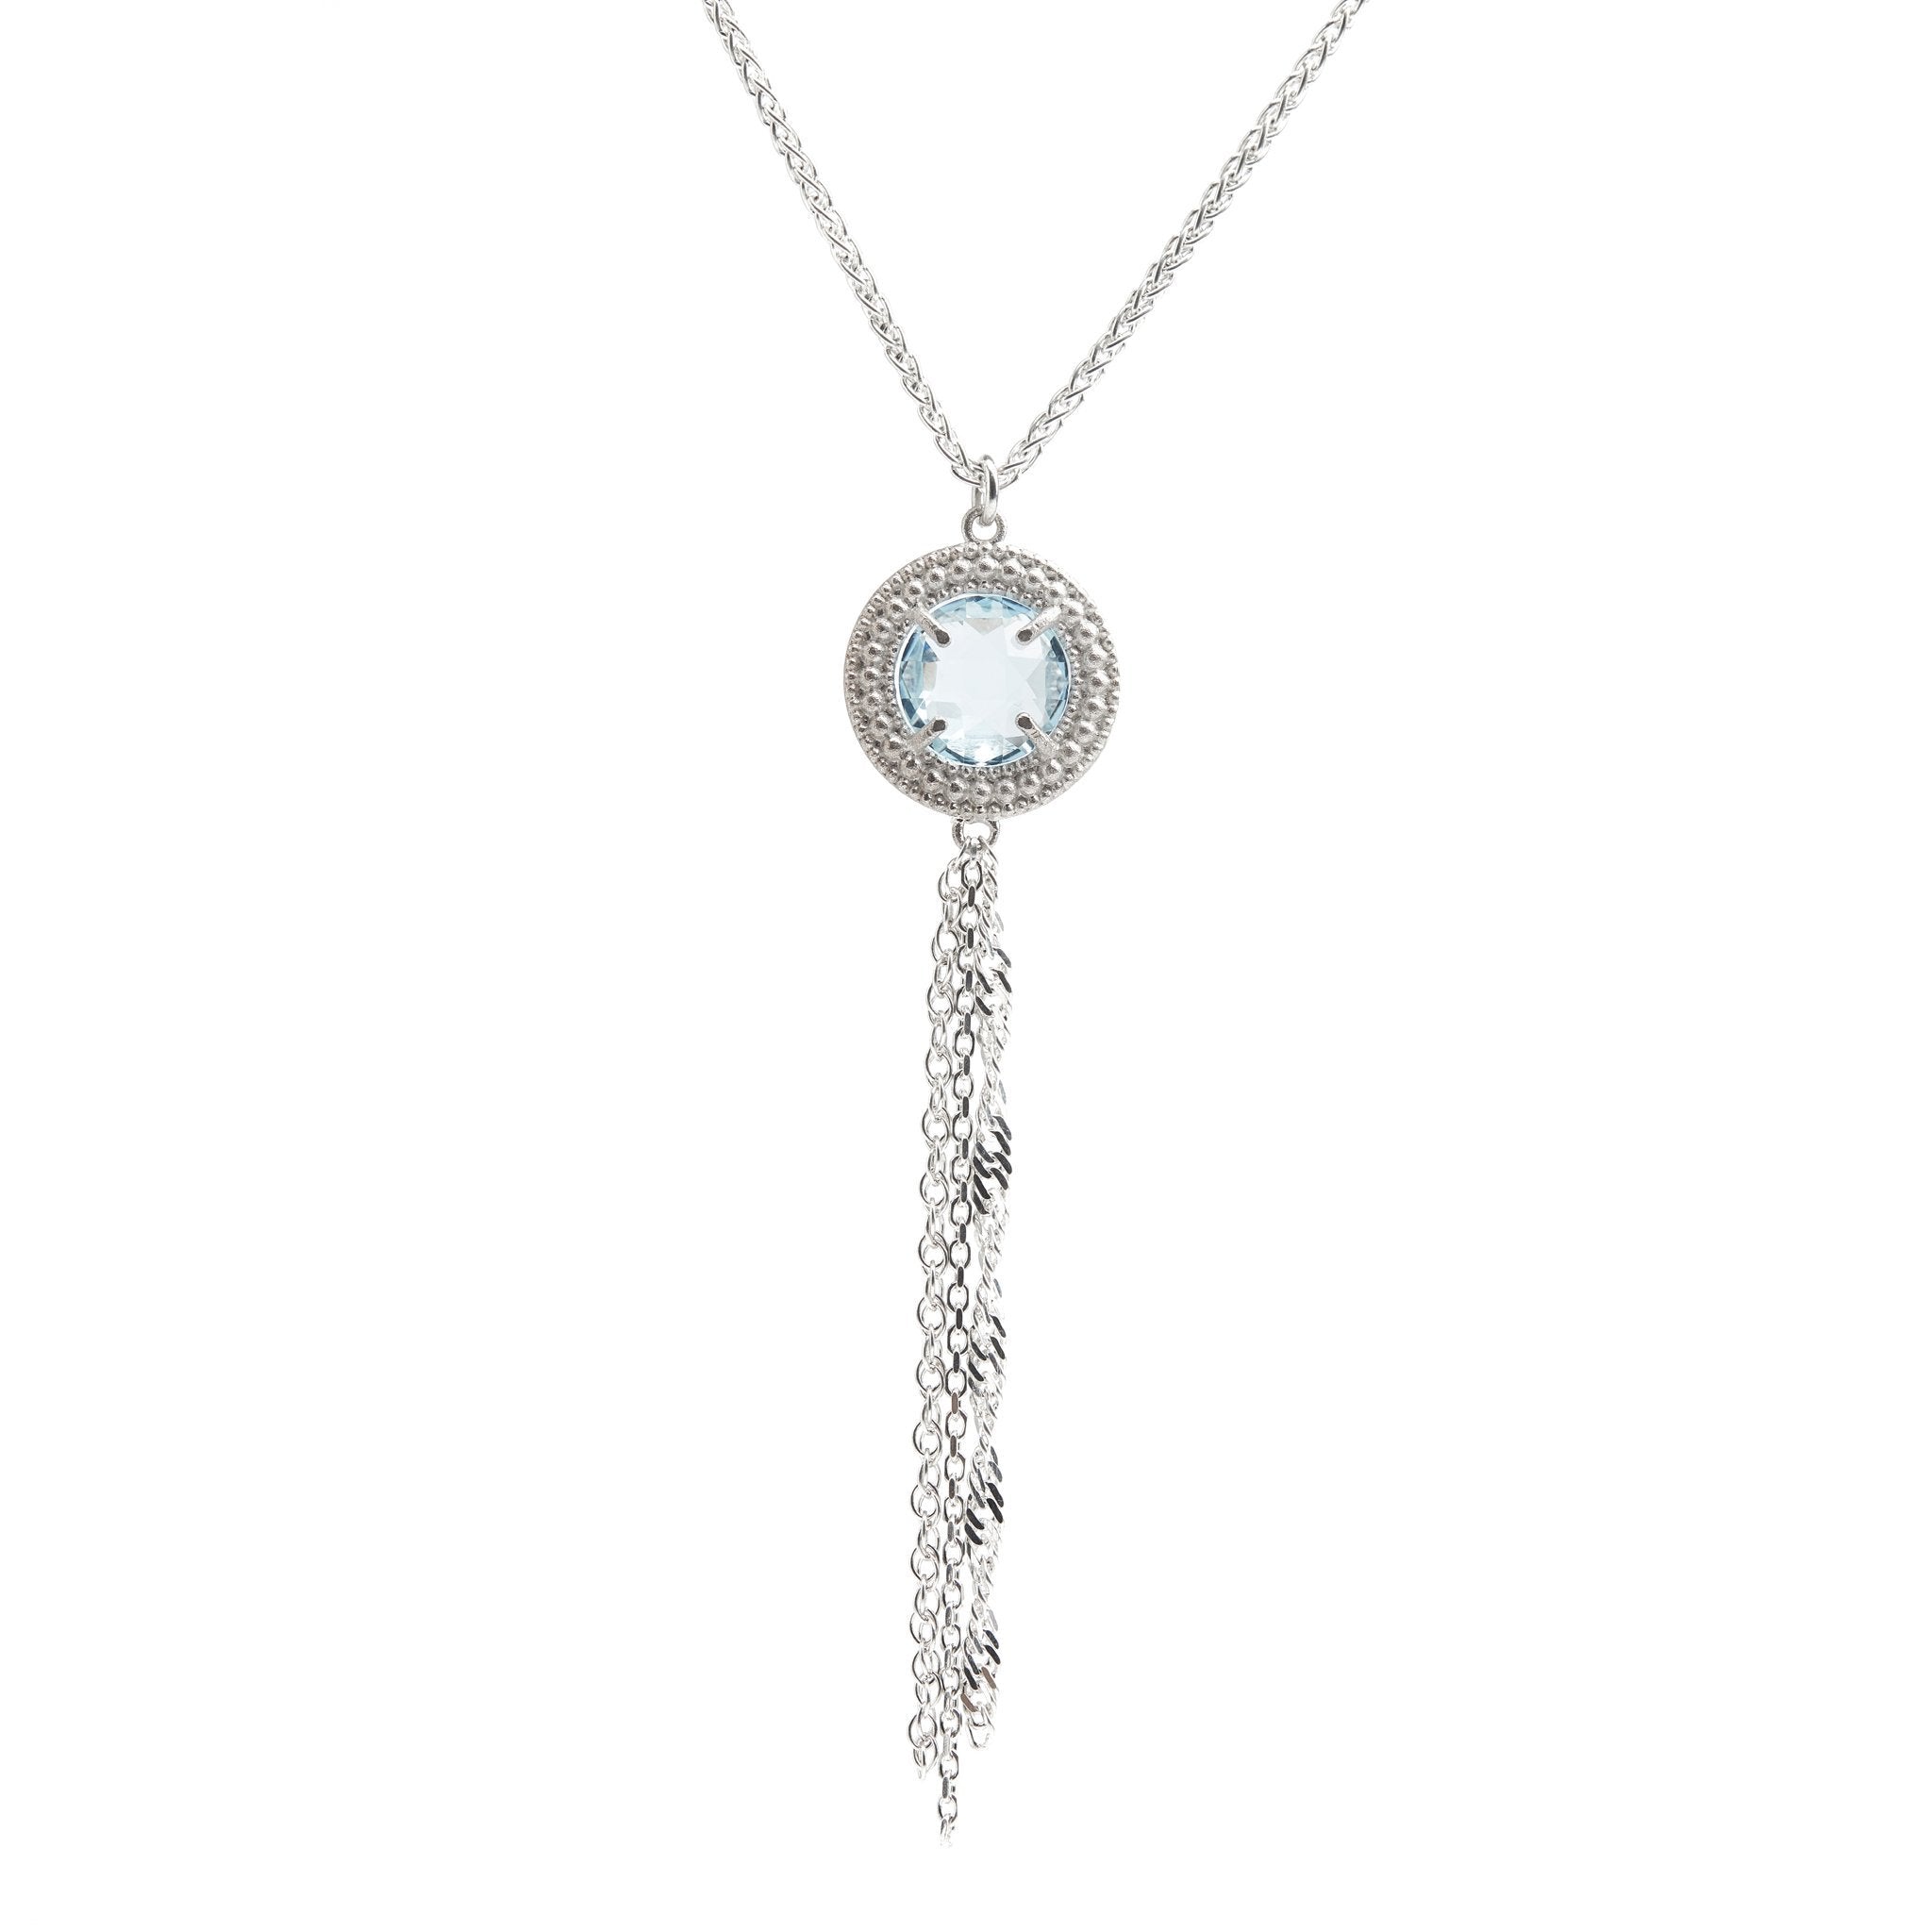 The Ethnic necklace in sky blue topaz. - Christelle Chamberland